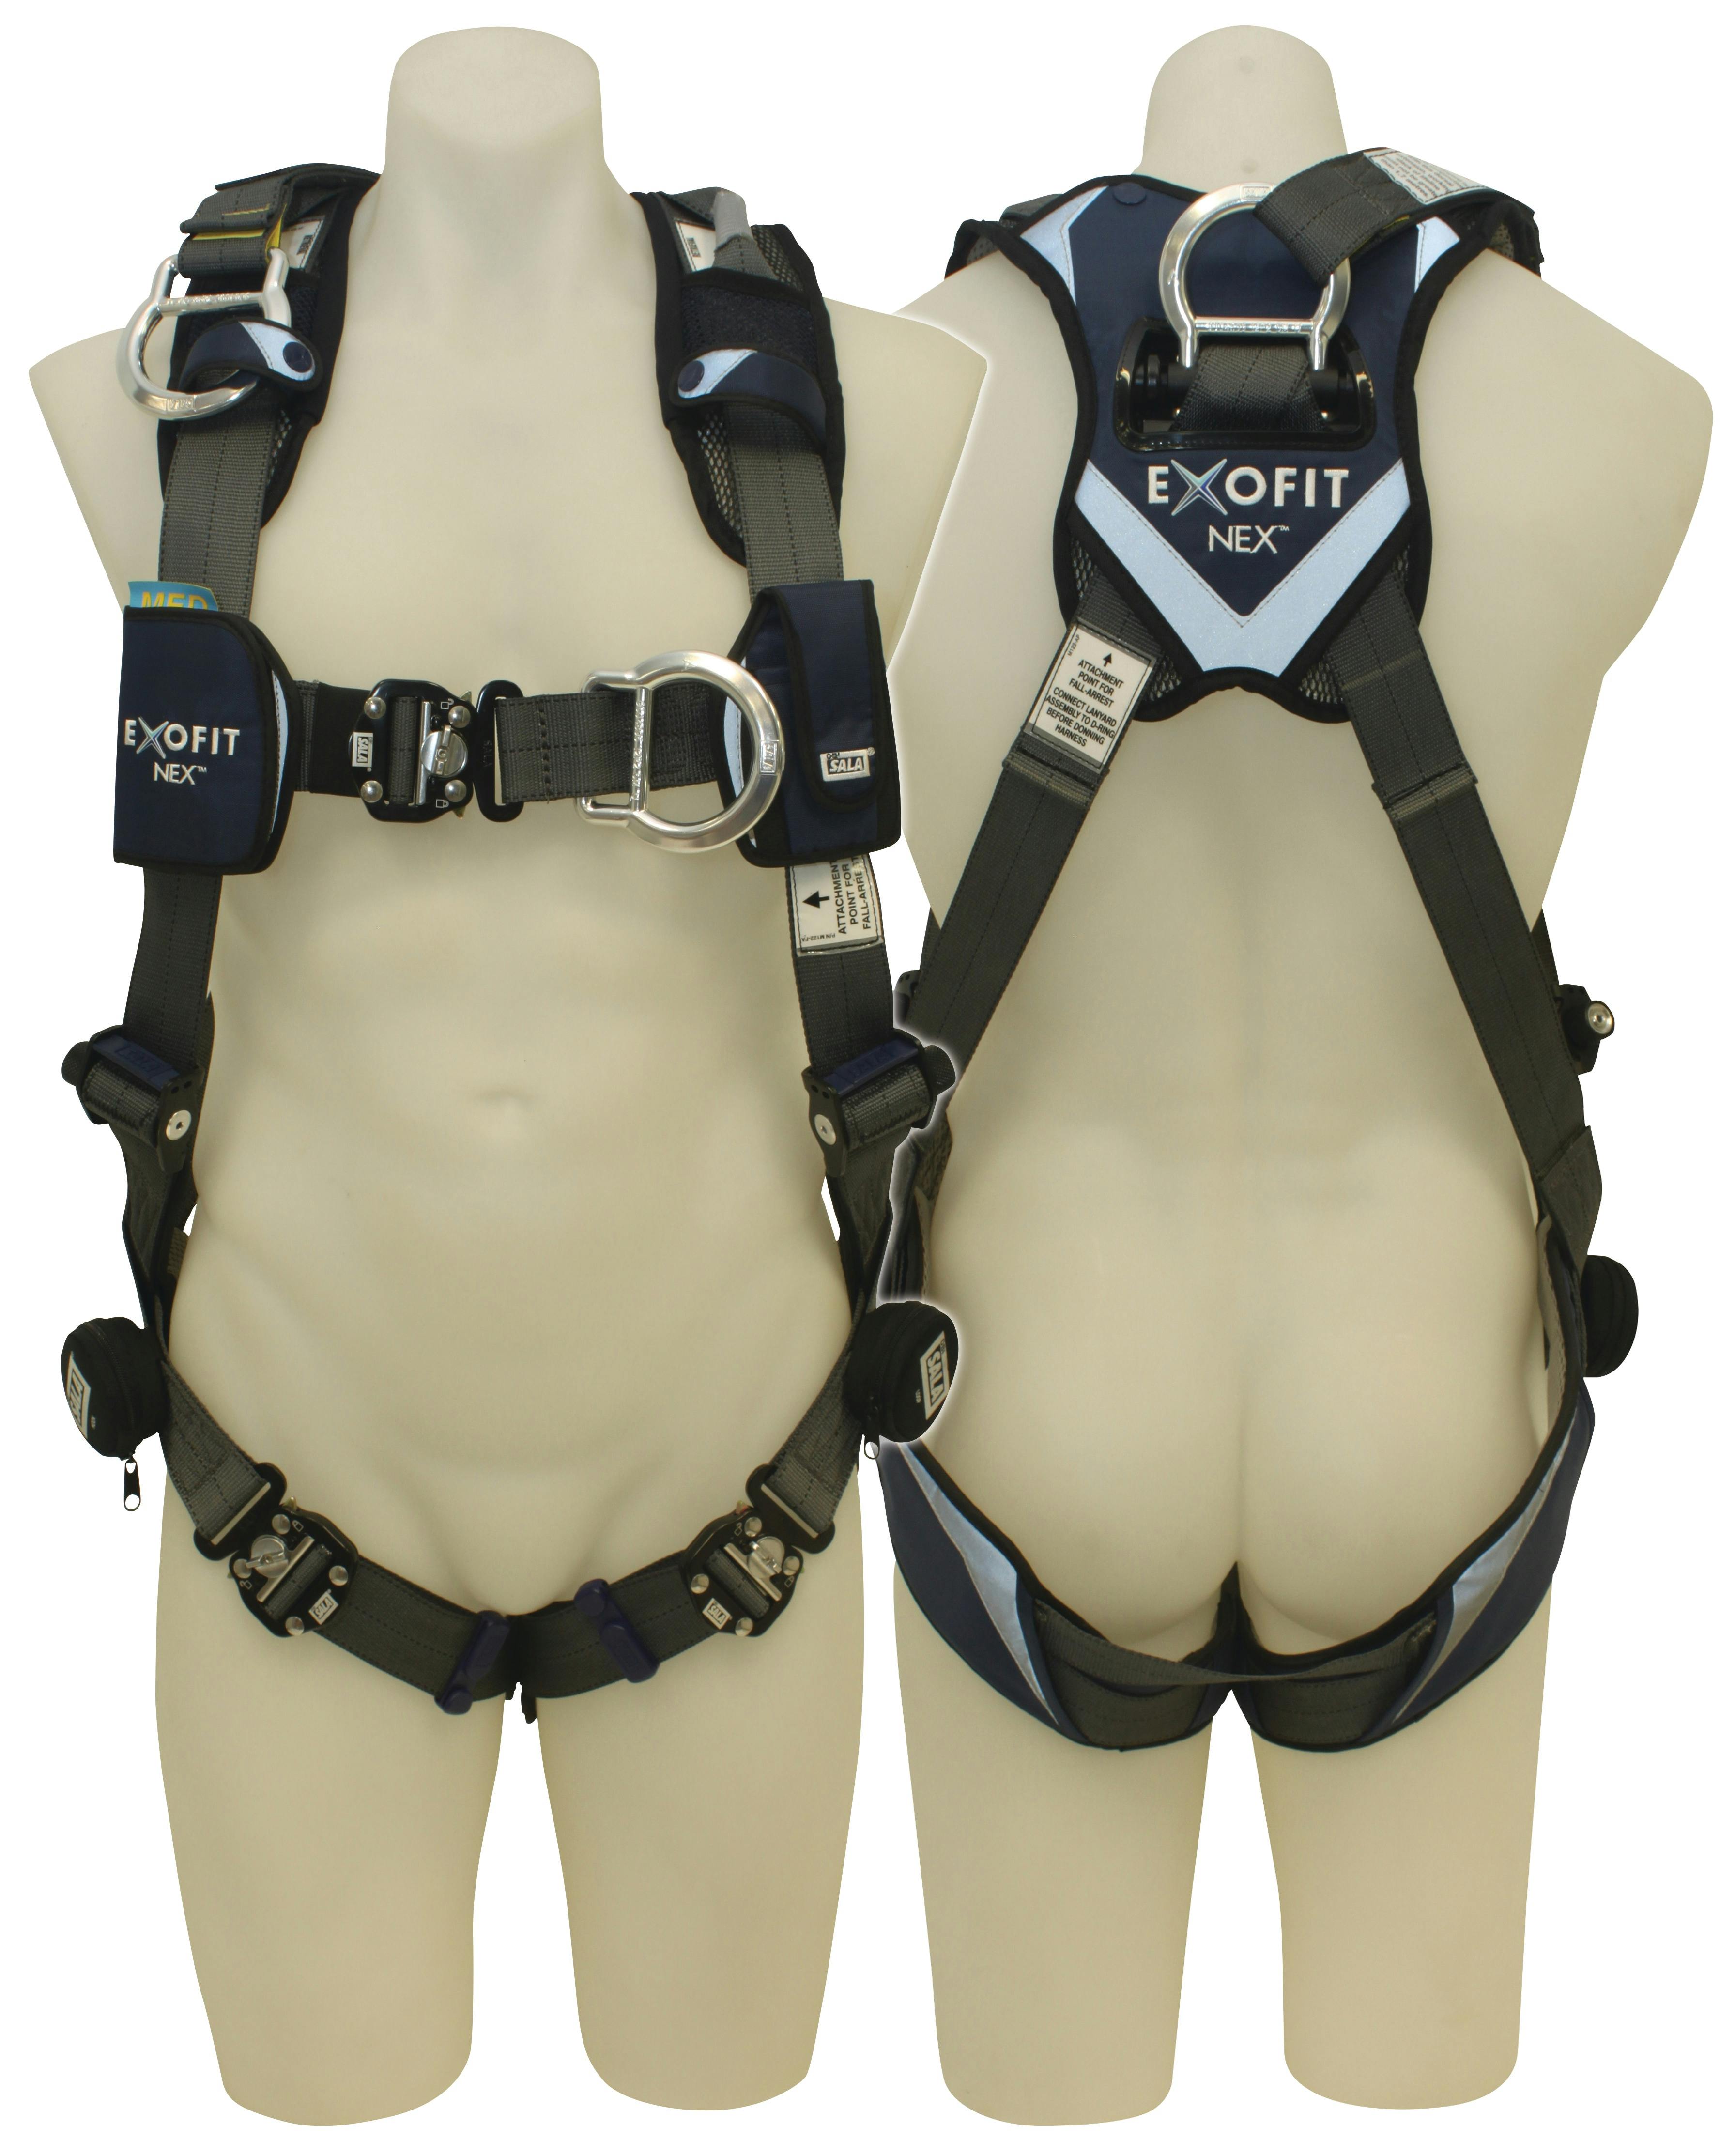 3M™ DBI-SALA® ExoFit NEX™ Riggers Harness with Dorsal Extension 603L2019, Grey, Large, 1 EA/Case